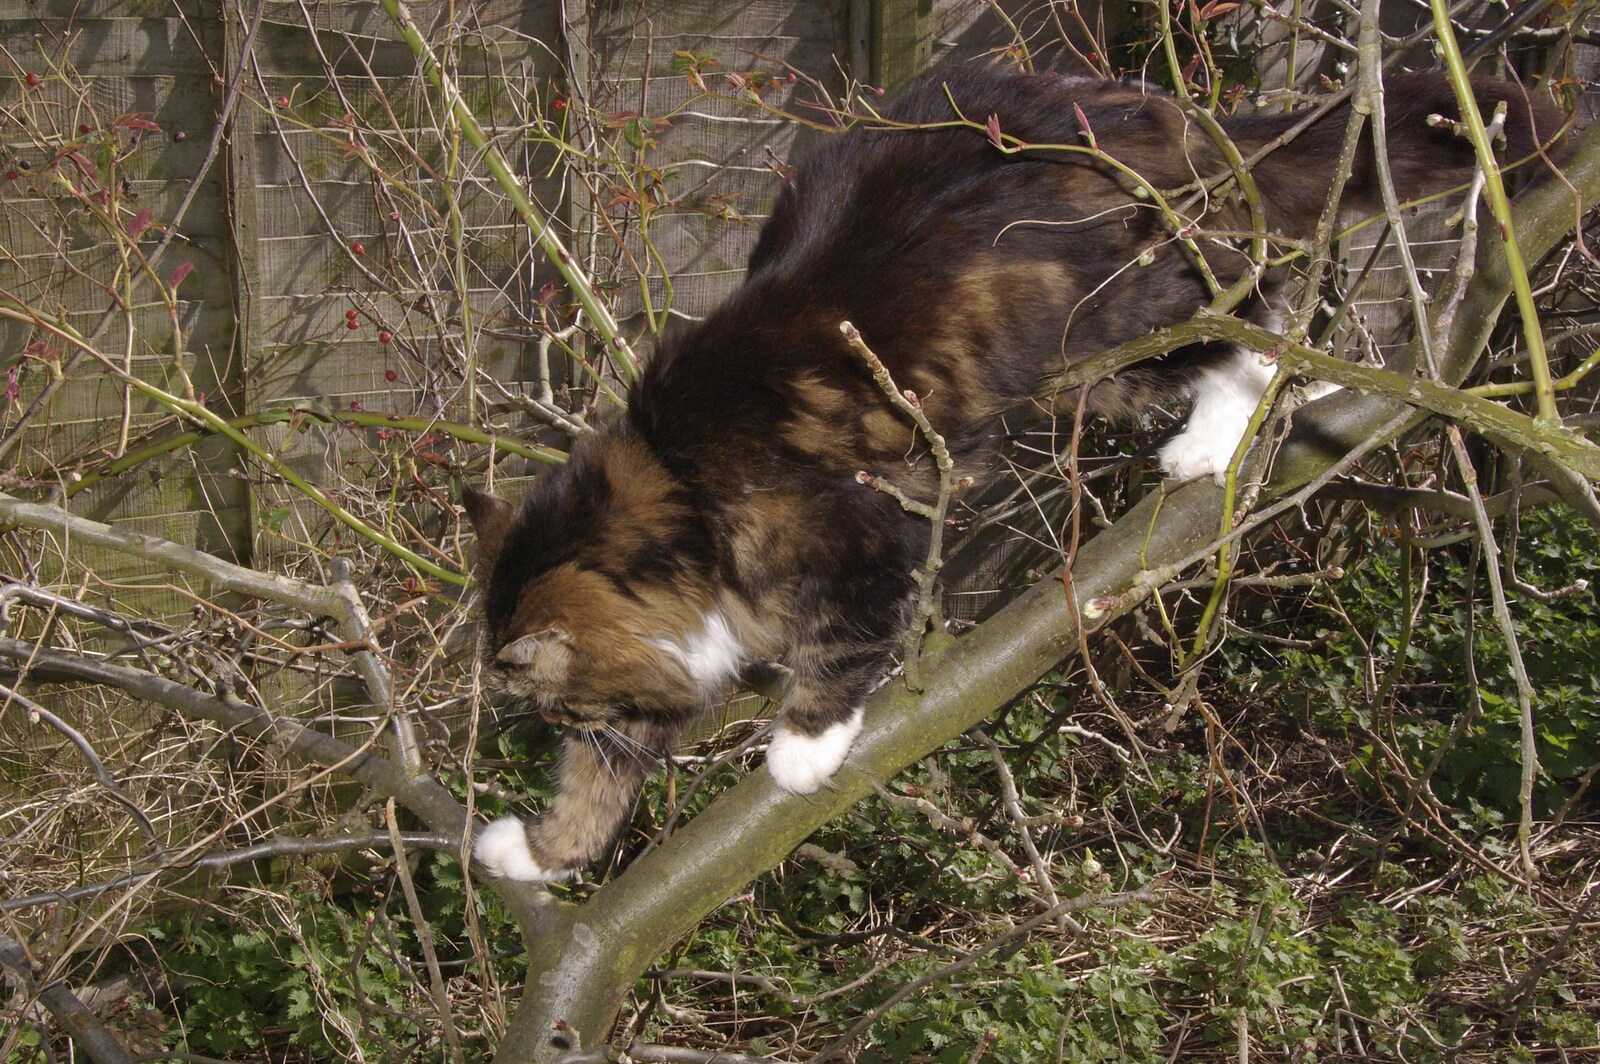 Cat-up-a-tree: Soph-bags in action from Mother and Mike, Rachel and Sam, and the Scan That Changes Everything - 30th March 2008